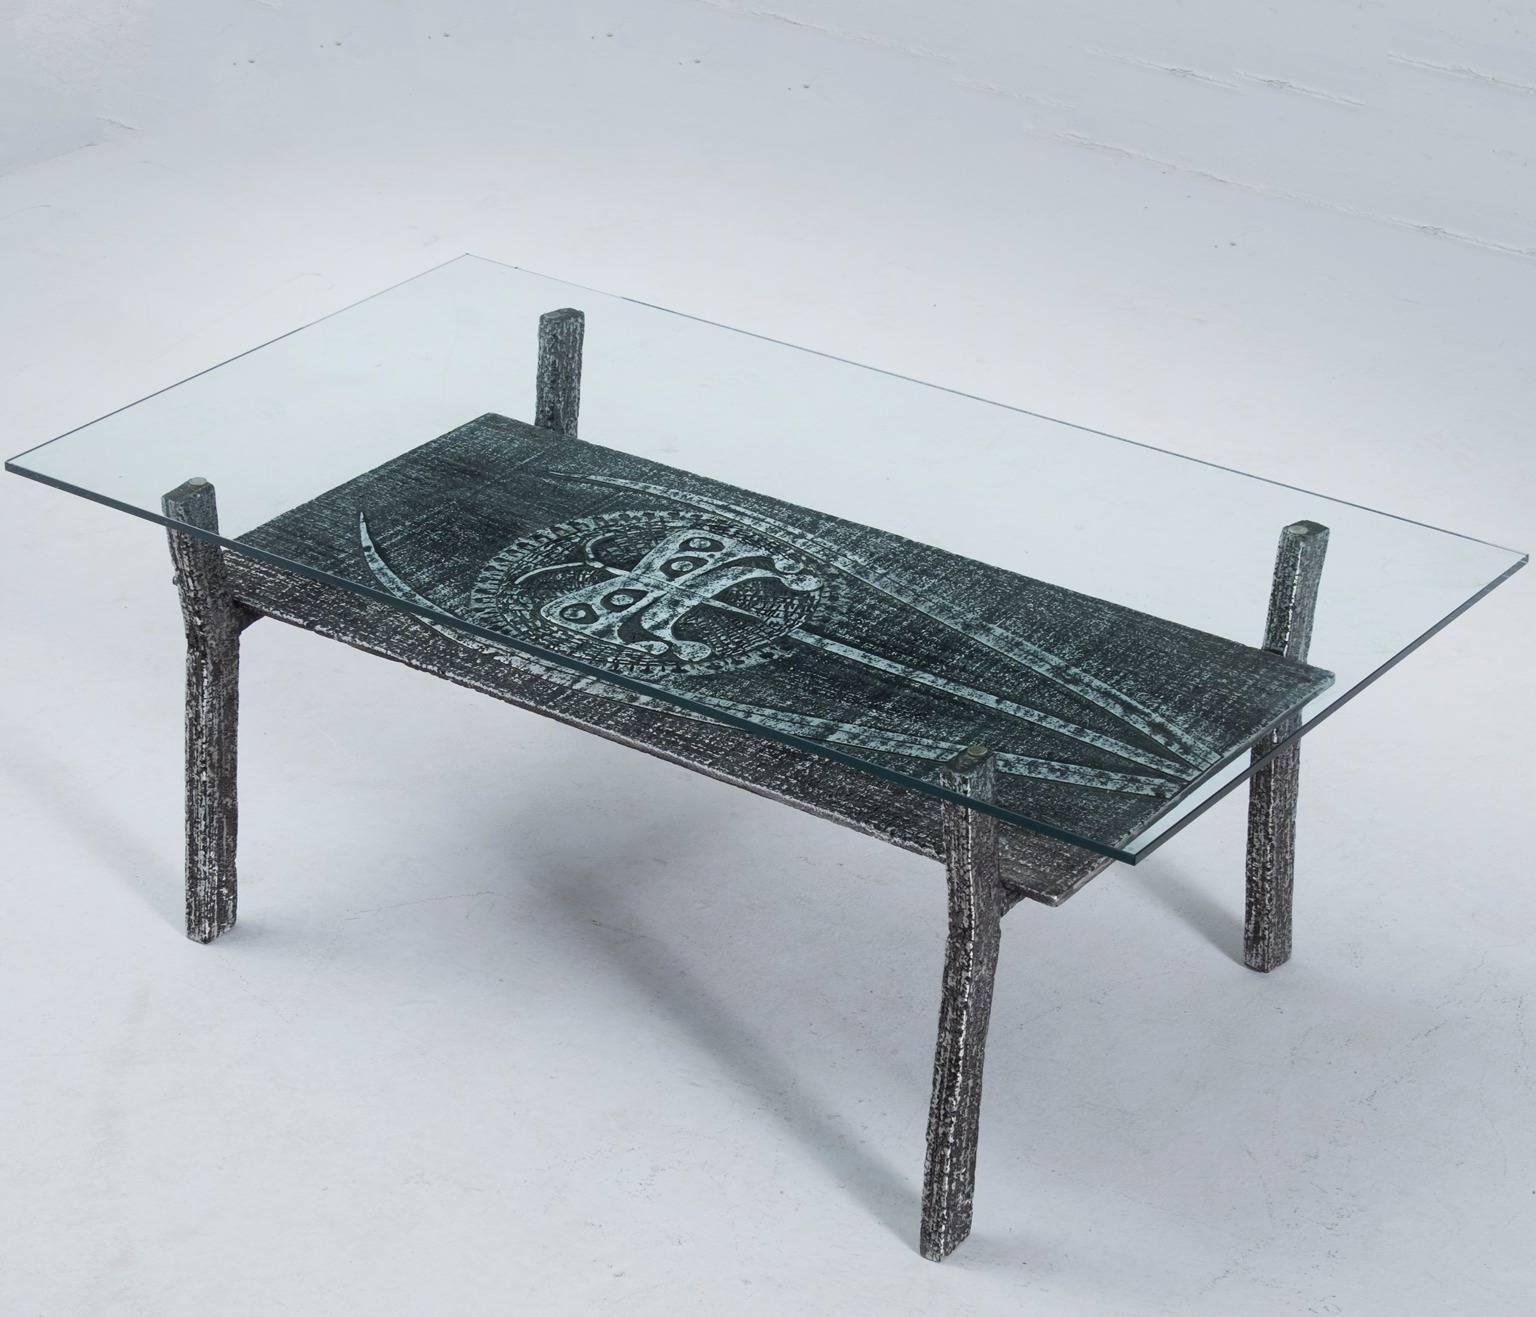 Interesting Brutalist coffeetable in cast iron and glass, Belgium 1970s.

The table has a well sized glass top and a lower top suitable for keeping magazines. The sincere, rough surface of the sand cast piece has a beautiful resin like structure